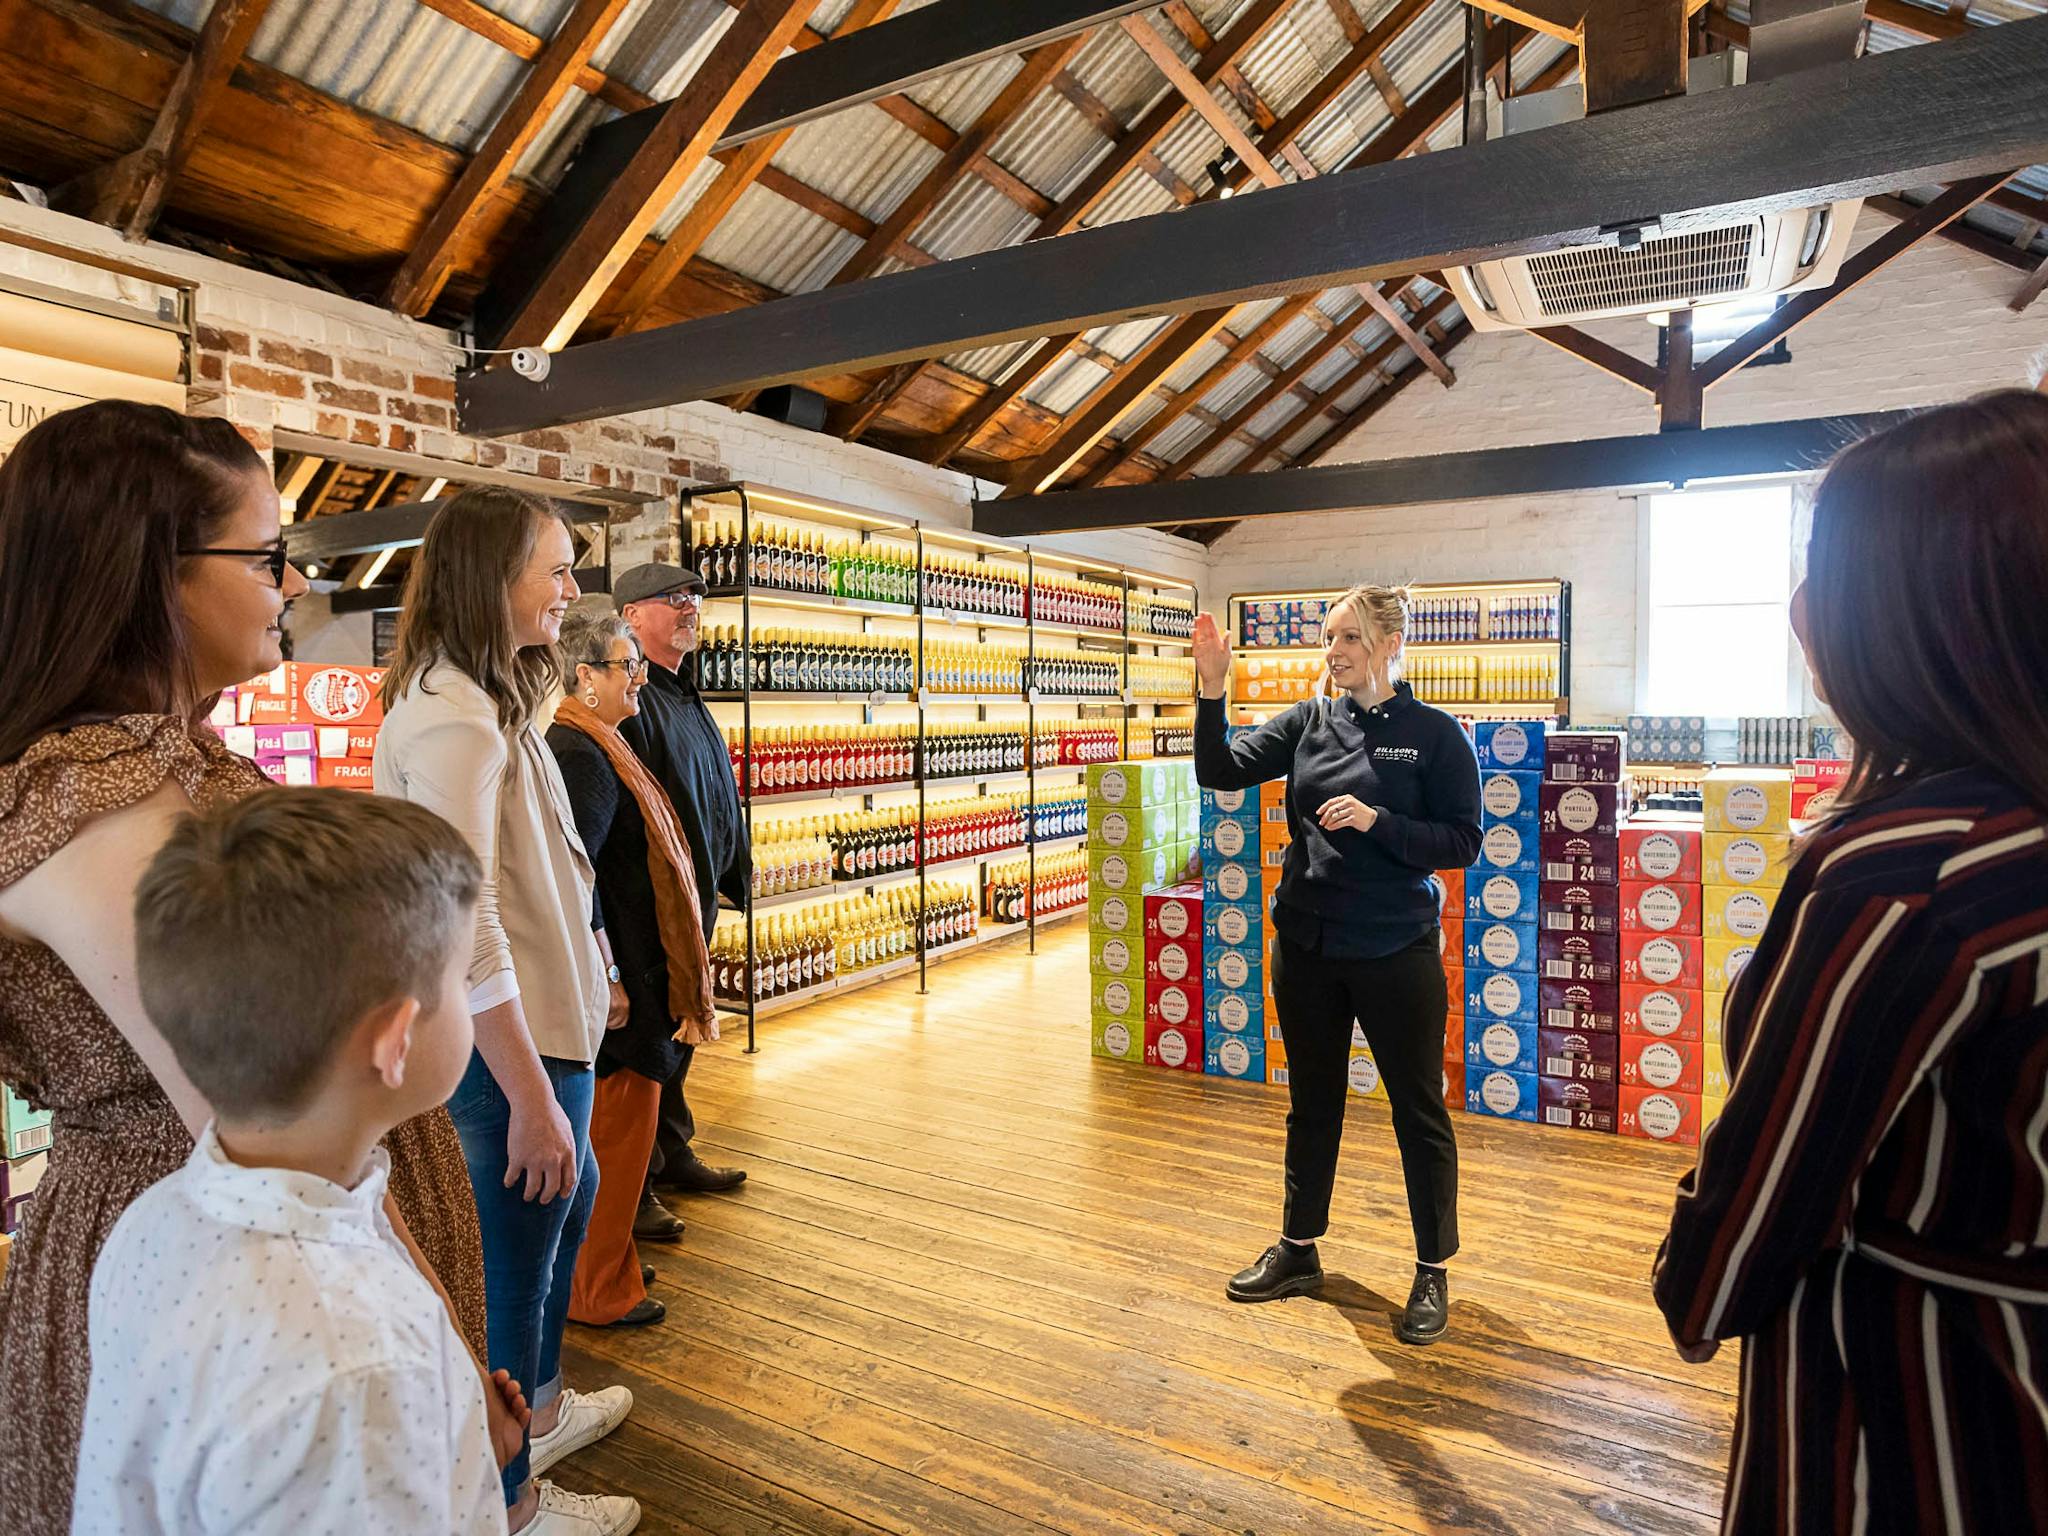 Tour hosts talking to guests in the Retail room